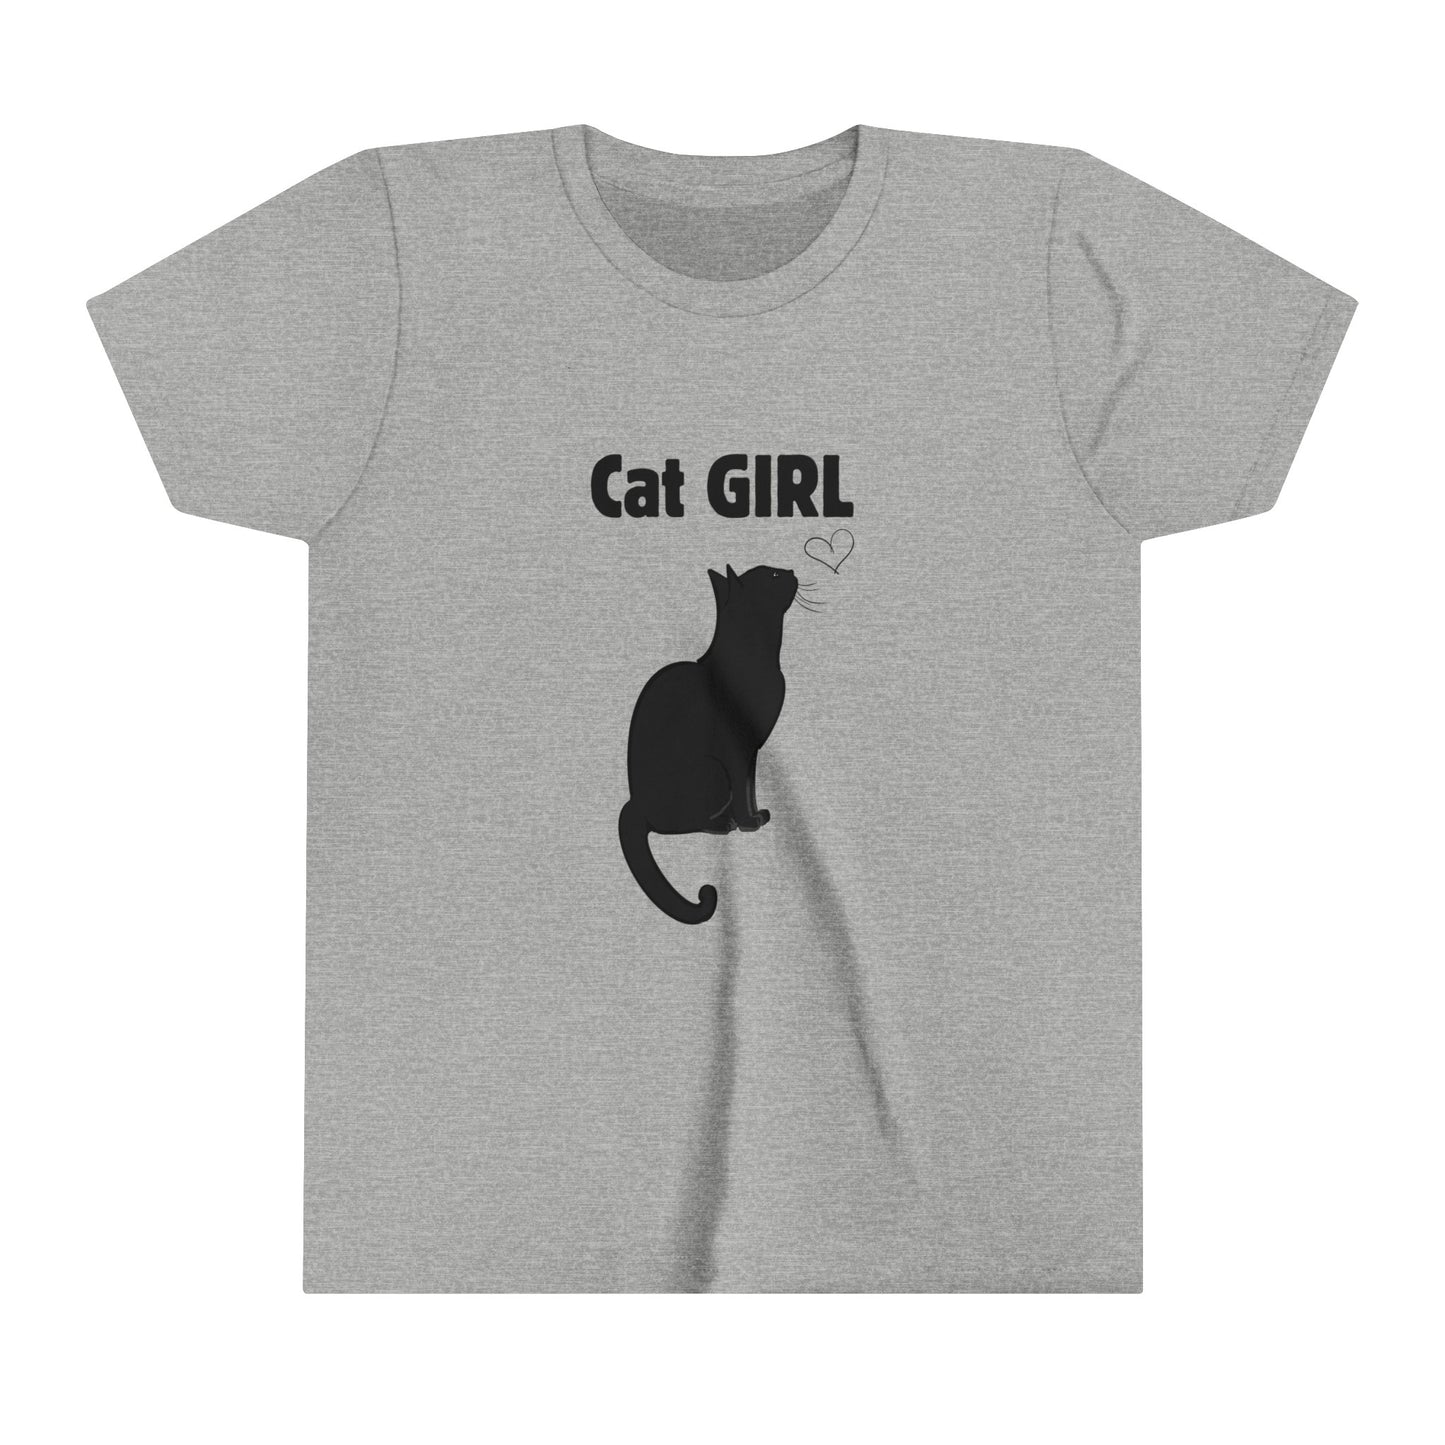 Short sleeve t-shirt with cat design for girls